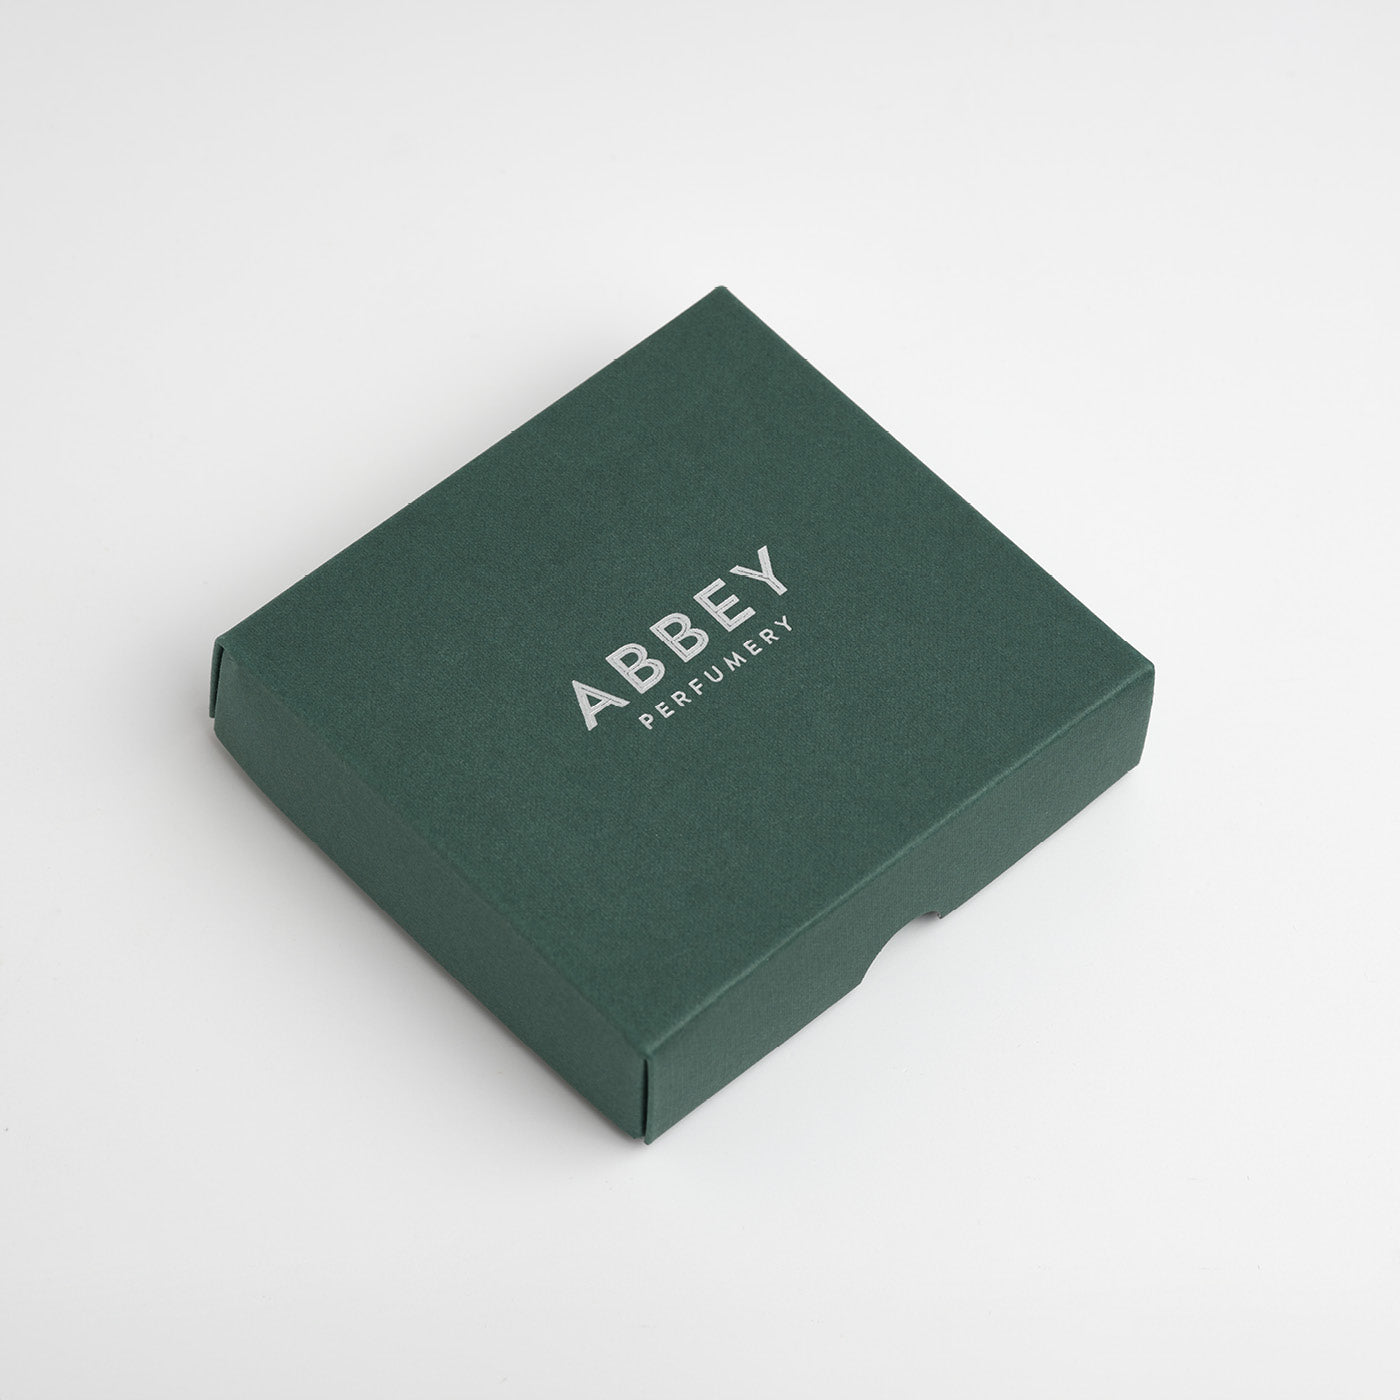 Luxury gift box with a silver foil logo in the centre